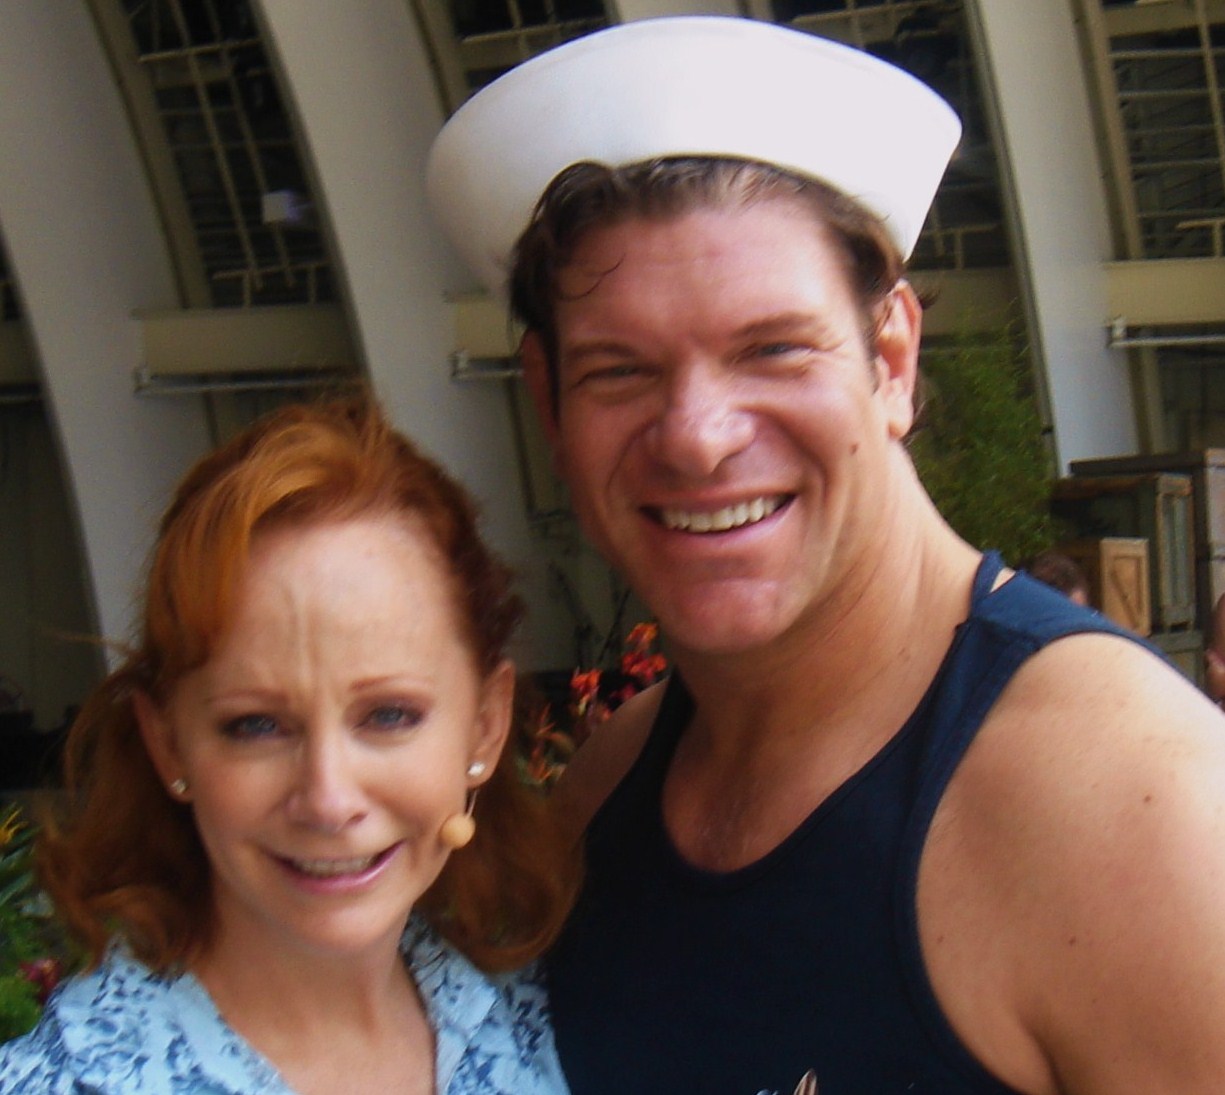 With Reba McEntire in 